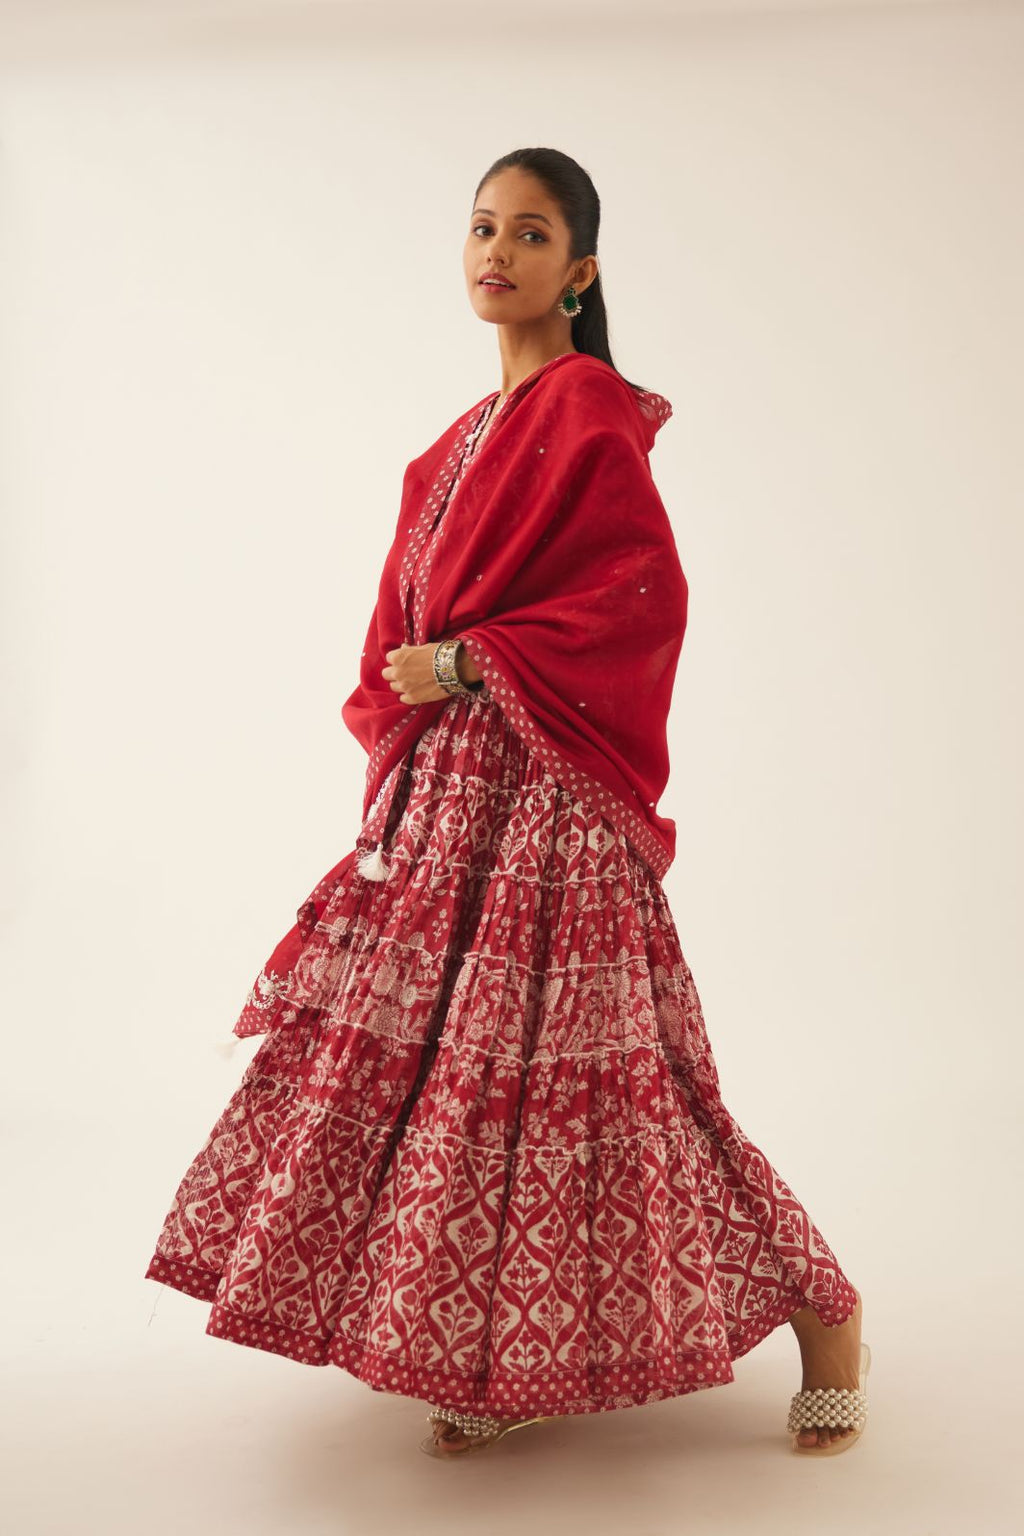 Red hand block printed multi-tiered kurta dress set with 3/4 sleeves, highlighted with sequins, tassels and bead work.